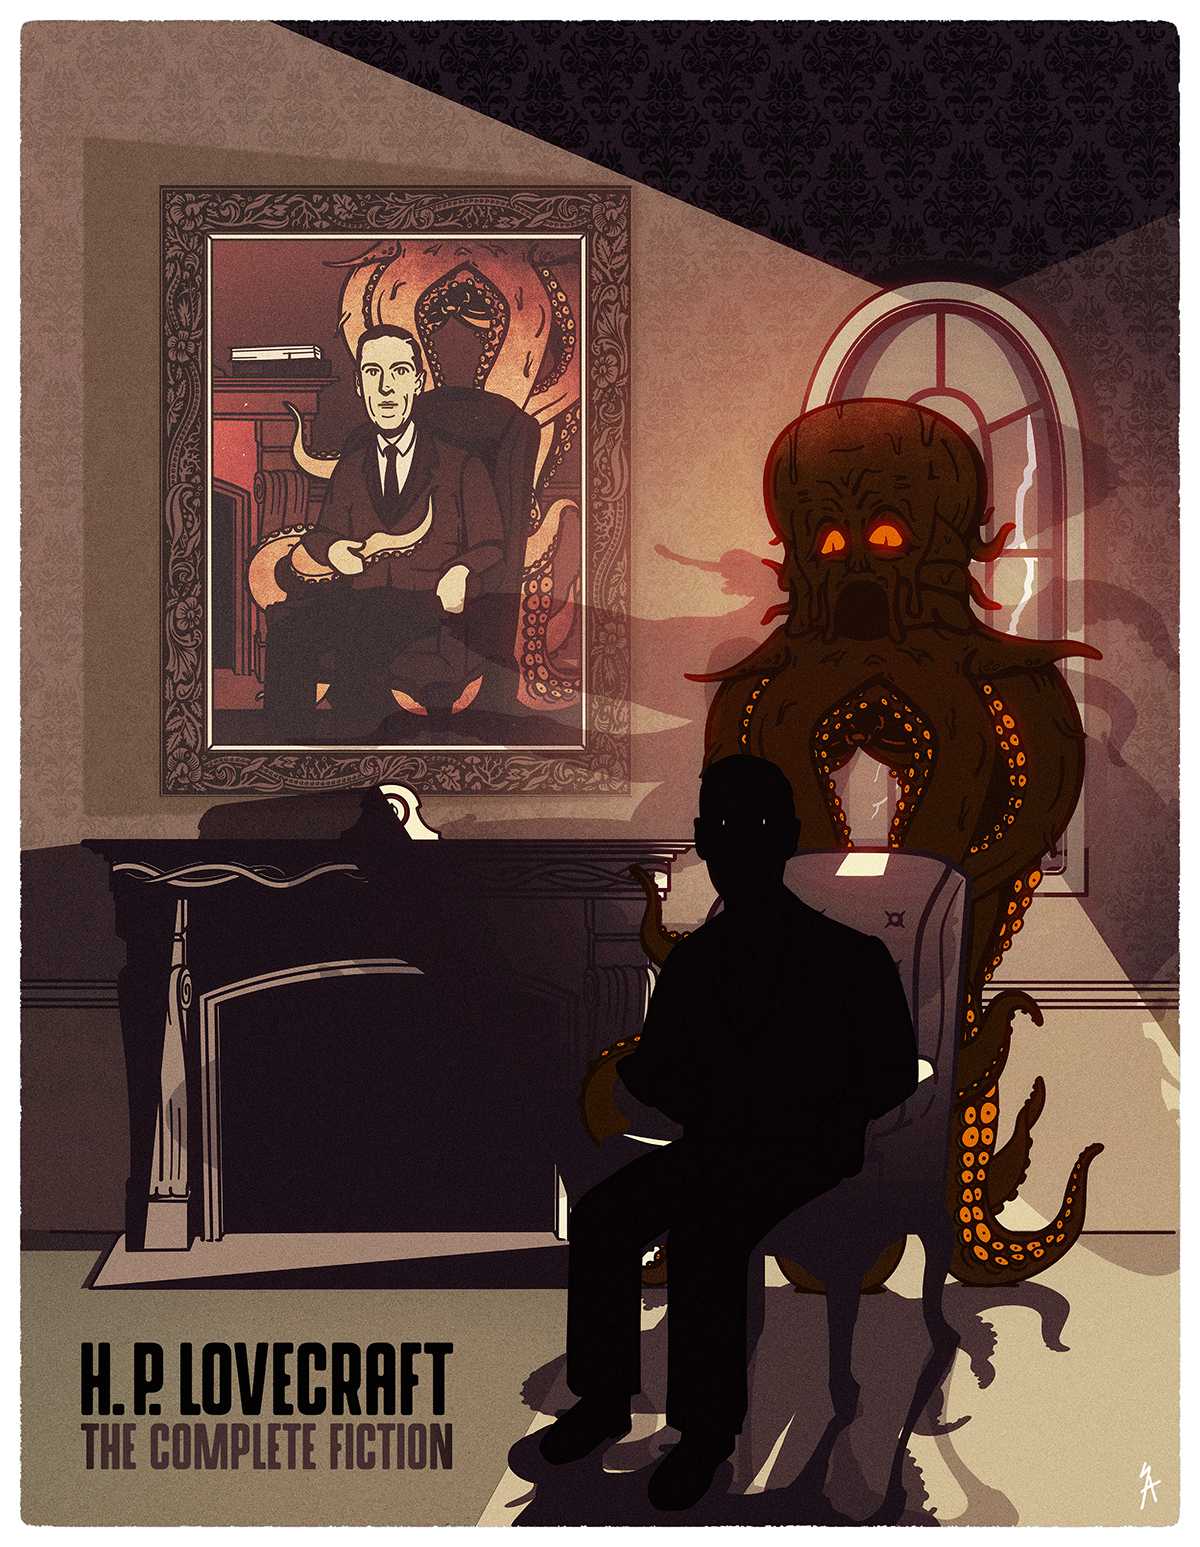 lovecraft hplovecraft cthulhu horror fiction gothic dark gif poster book